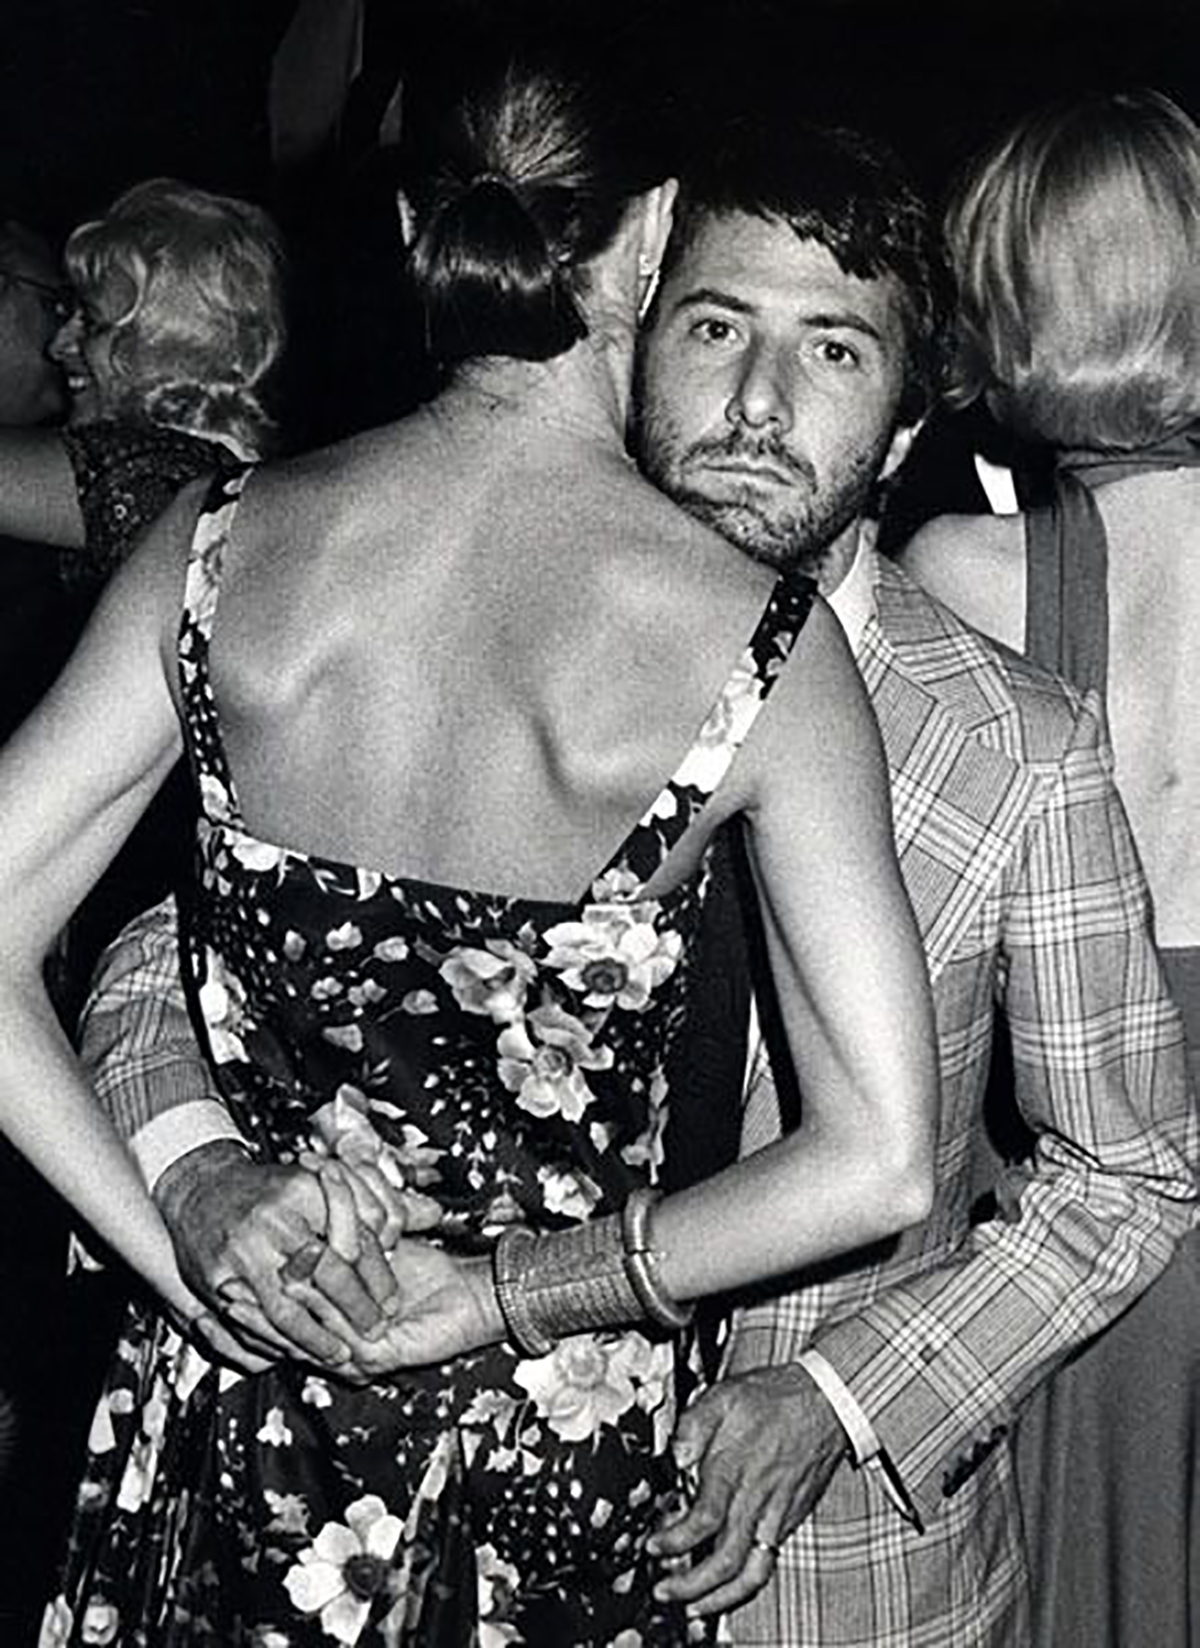 Dustin Hoffman dancing with his first wife Anne Byrne in 1970.